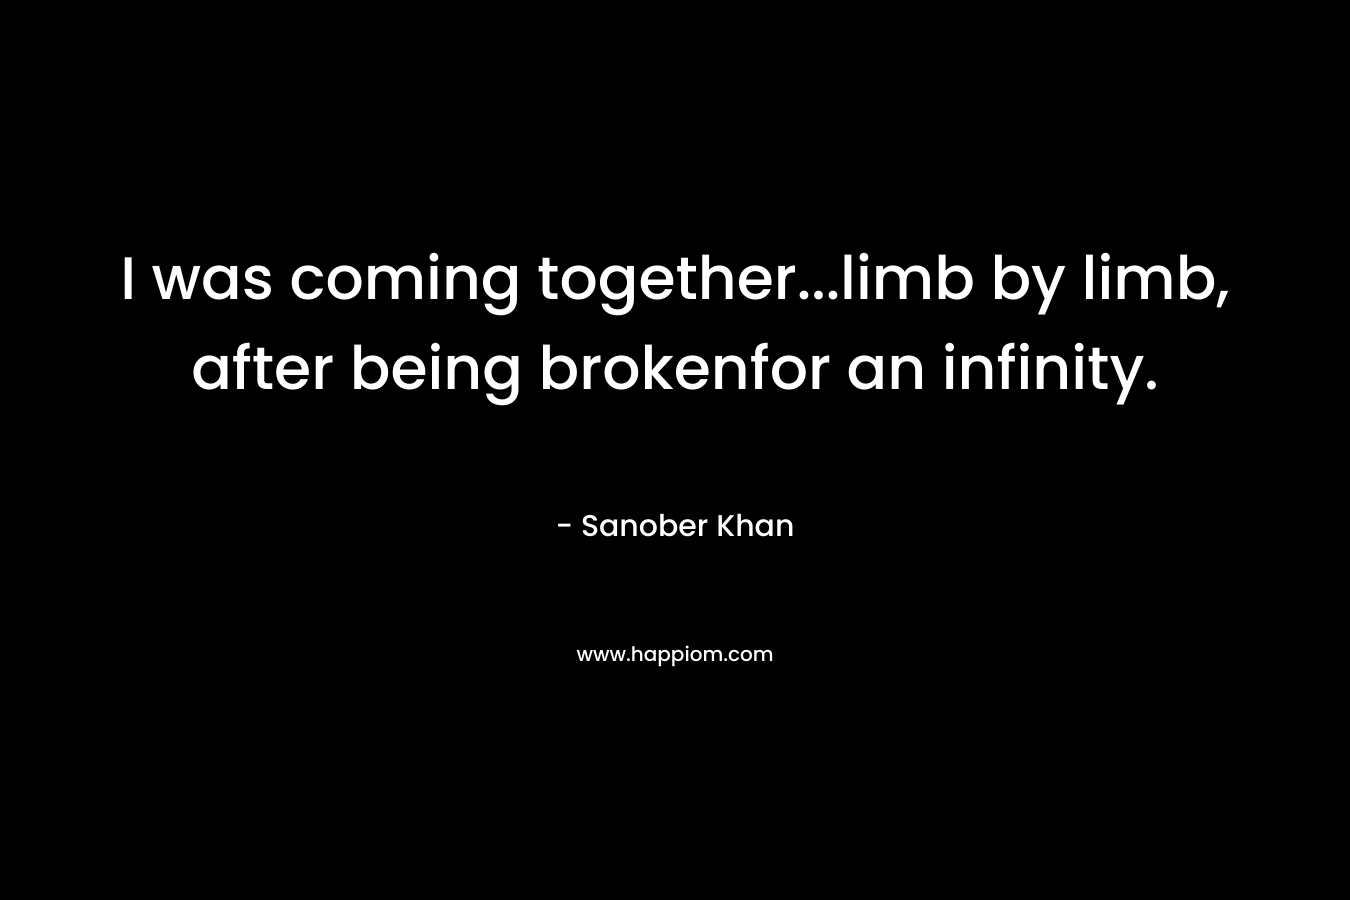 I was coming together...limb by limb, after being brokenfor an infinity.